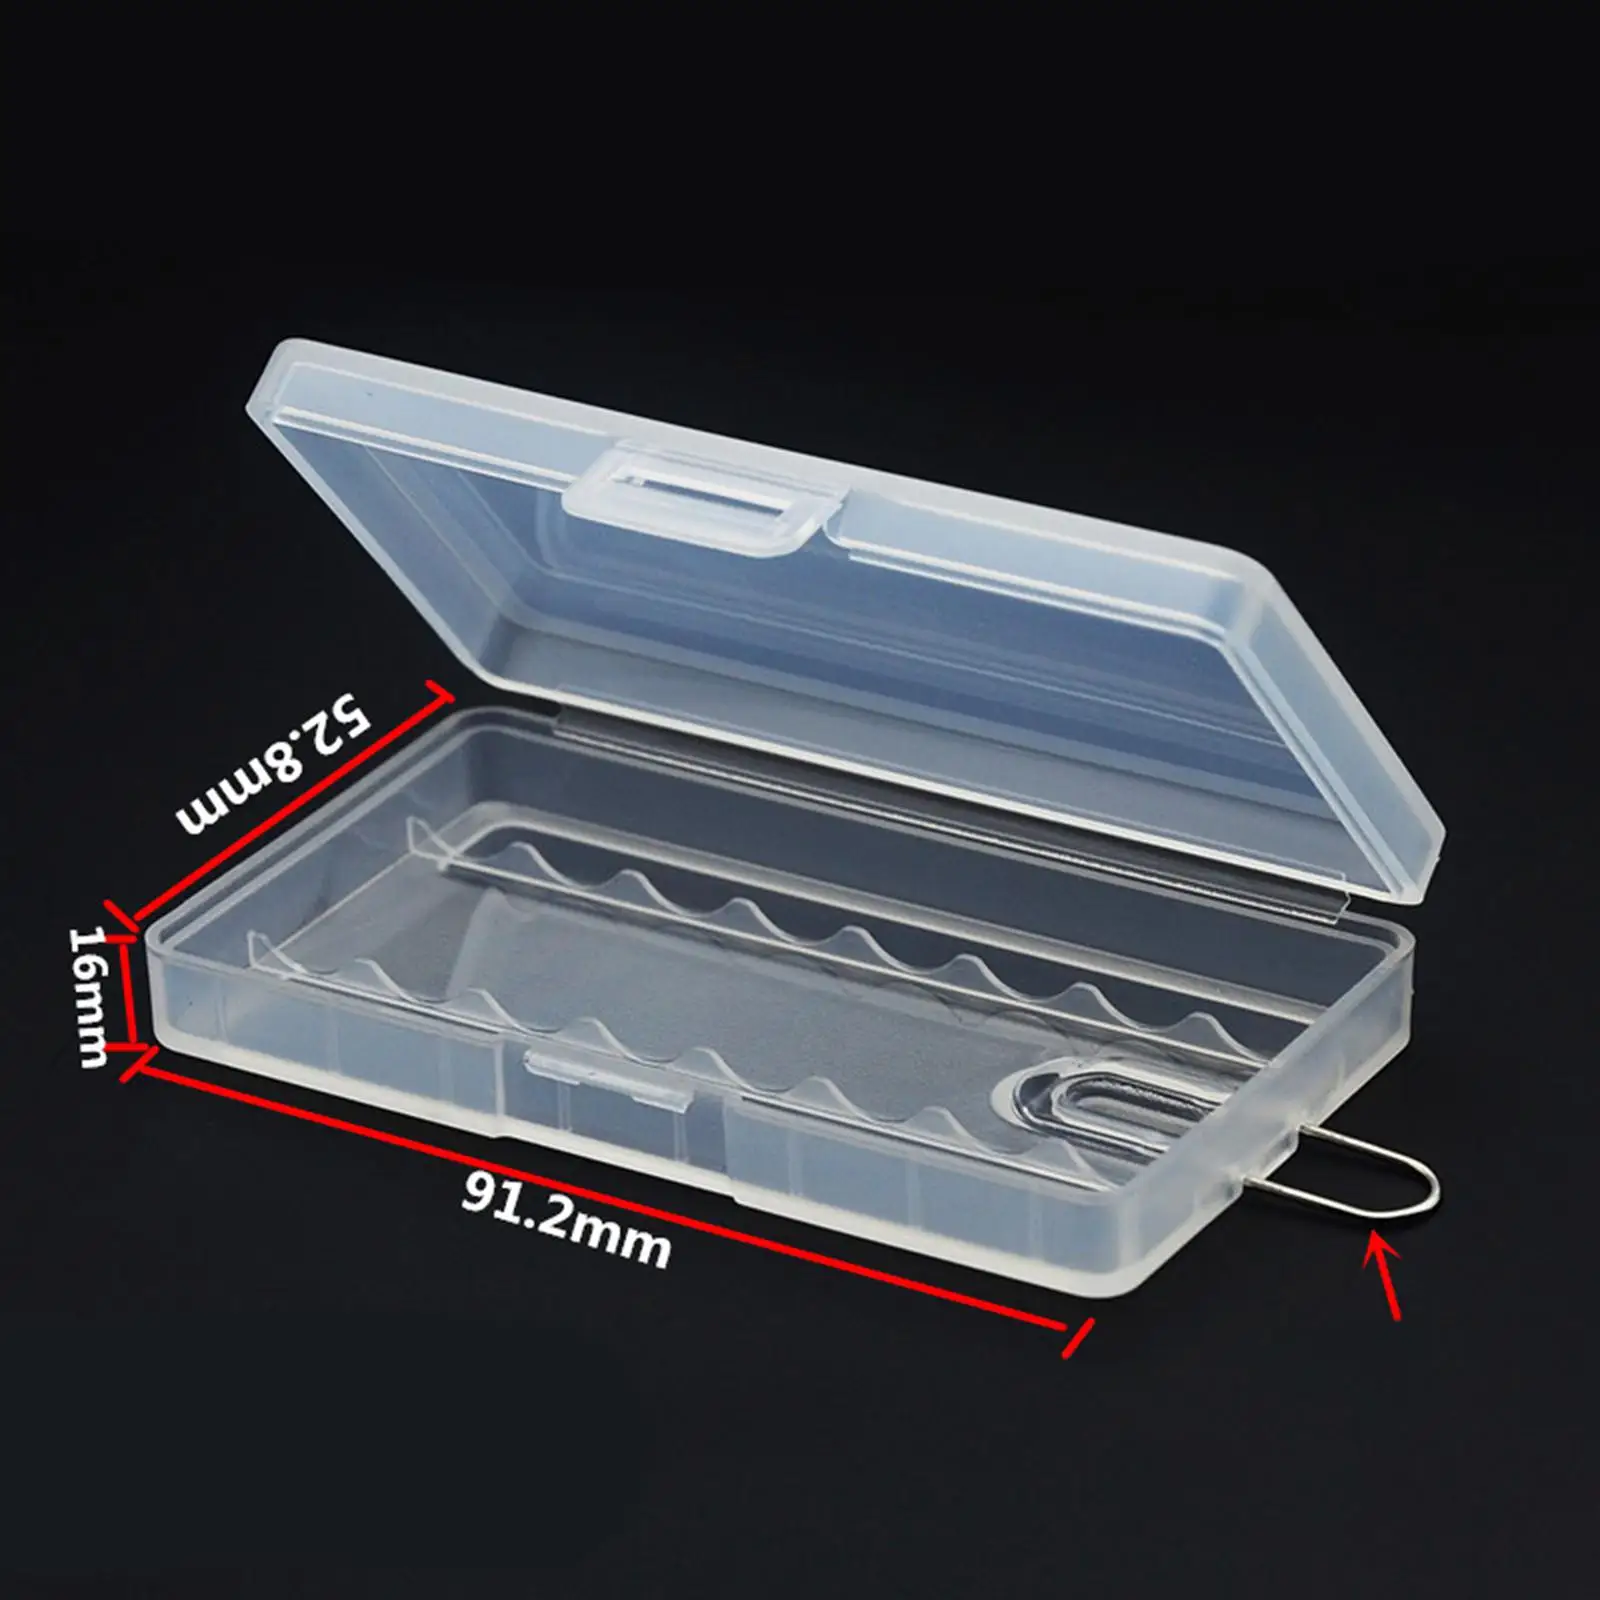 Battery Storage Case Holds 8 AAA Batteries Clear Color Practical Durable Portable Organizer Holder Box Protective Container